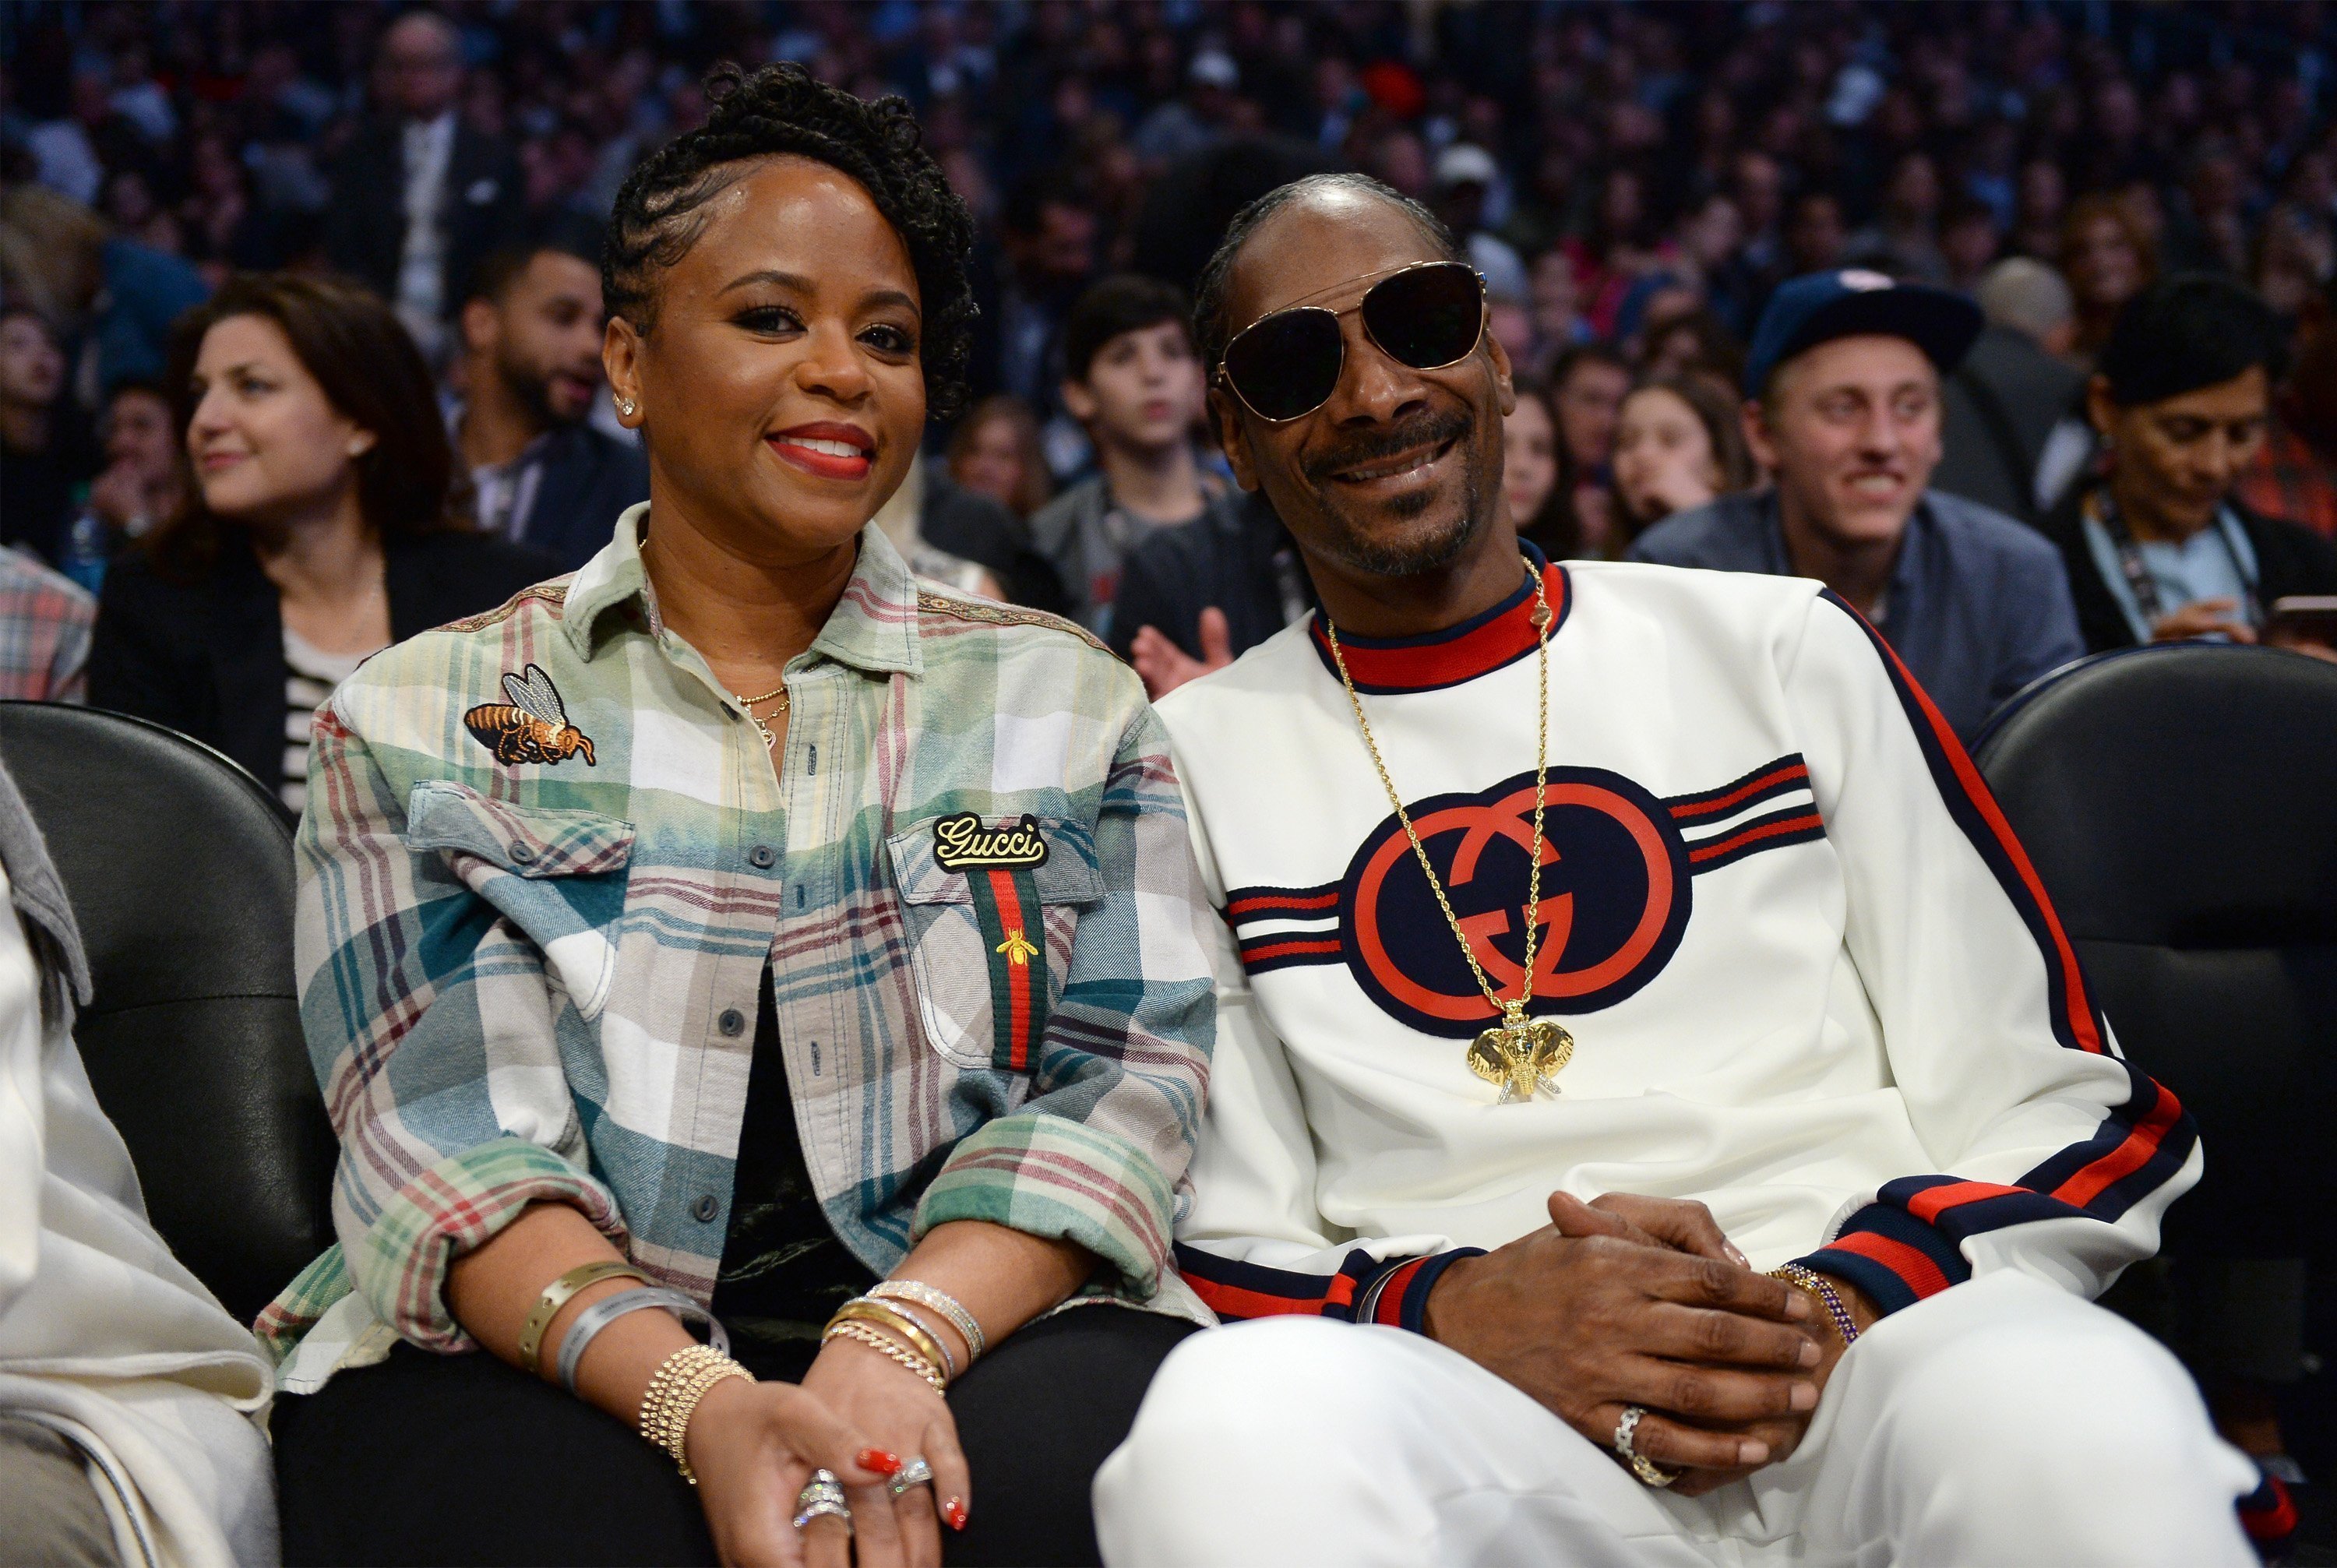 Snoop Dogg and wife Shante attend the NBA All-Star Game 2018 at Staples Center on February 18, 2018. | Photo: Getty Images